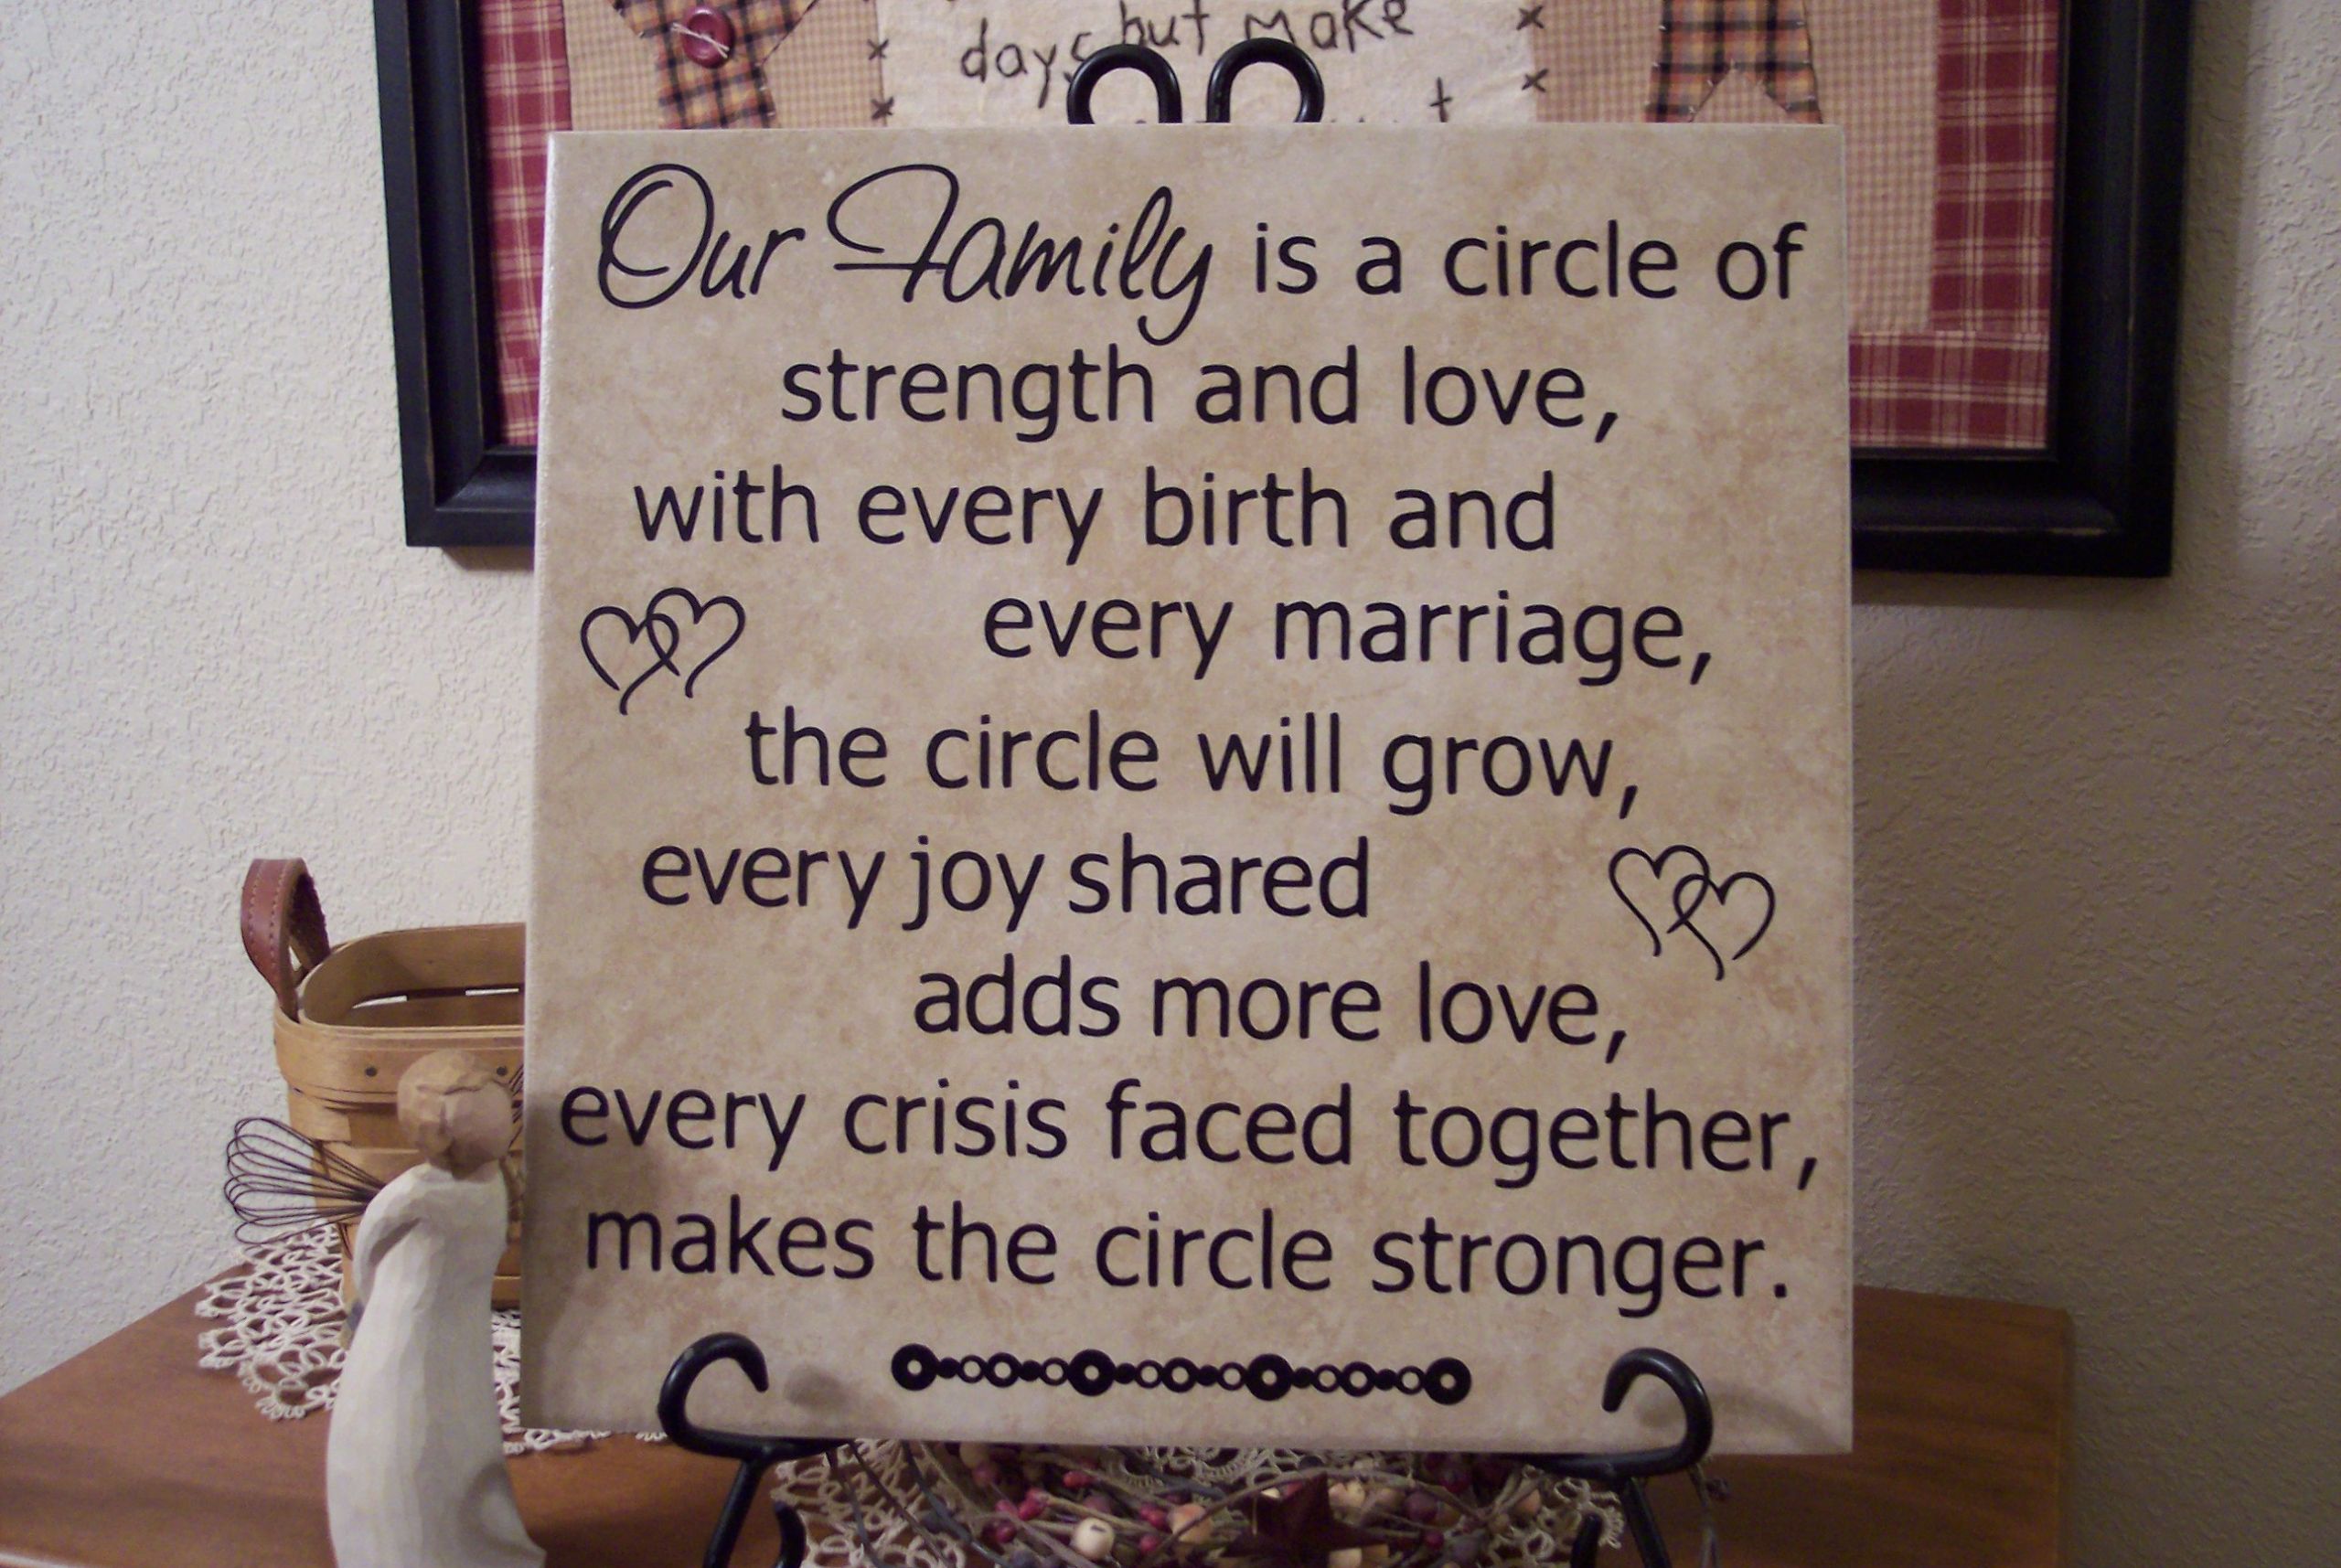 Marriage Strength Quotes
 Our Family is a circle of strength and love with every